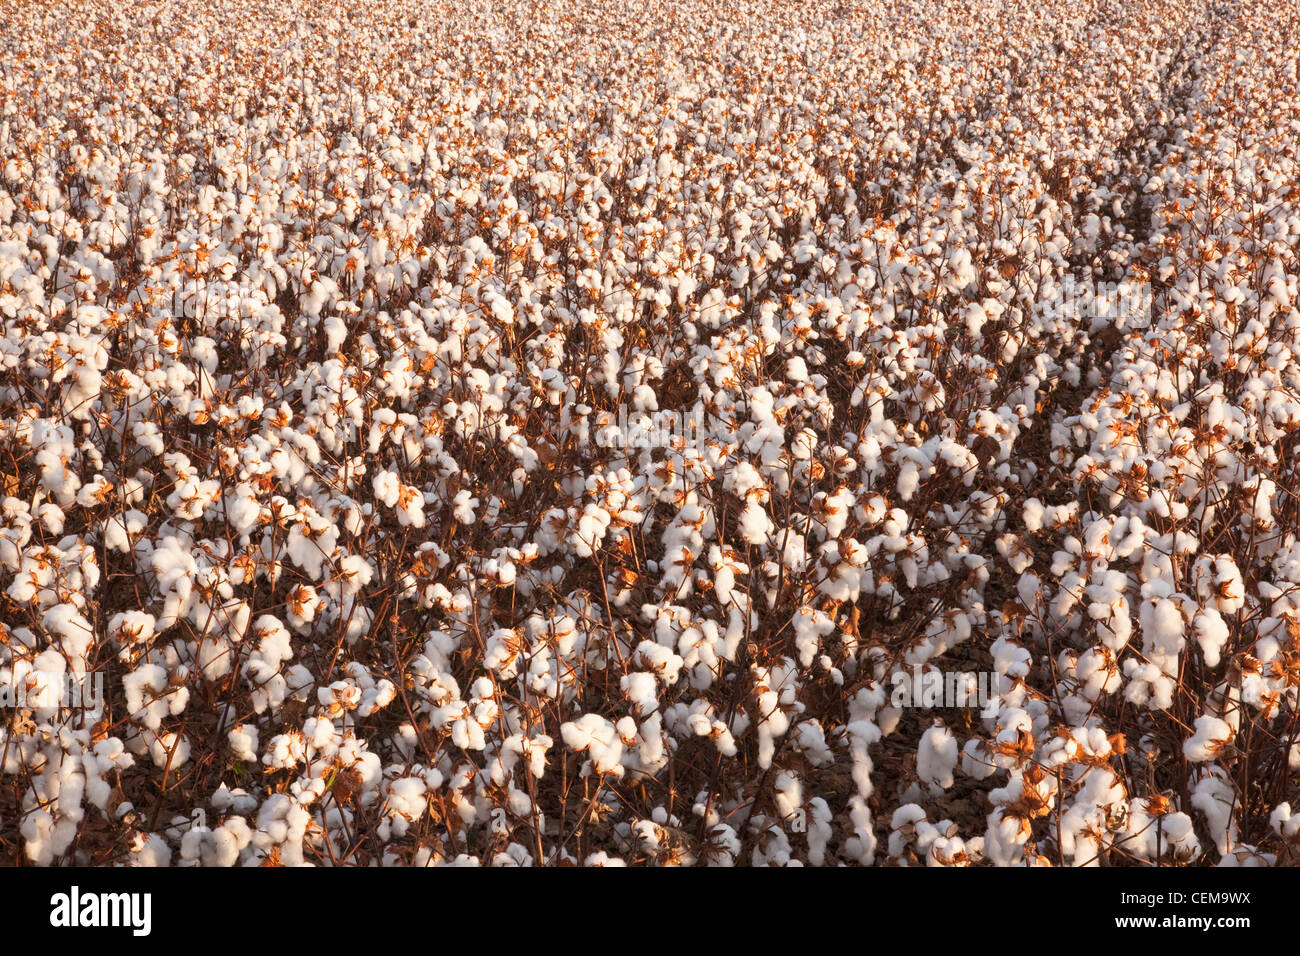 Rows of mature defoliated high-yield cotton plants at harvest stage in early morning Autumn light / near England, Arkansas, USA. Stock Photo